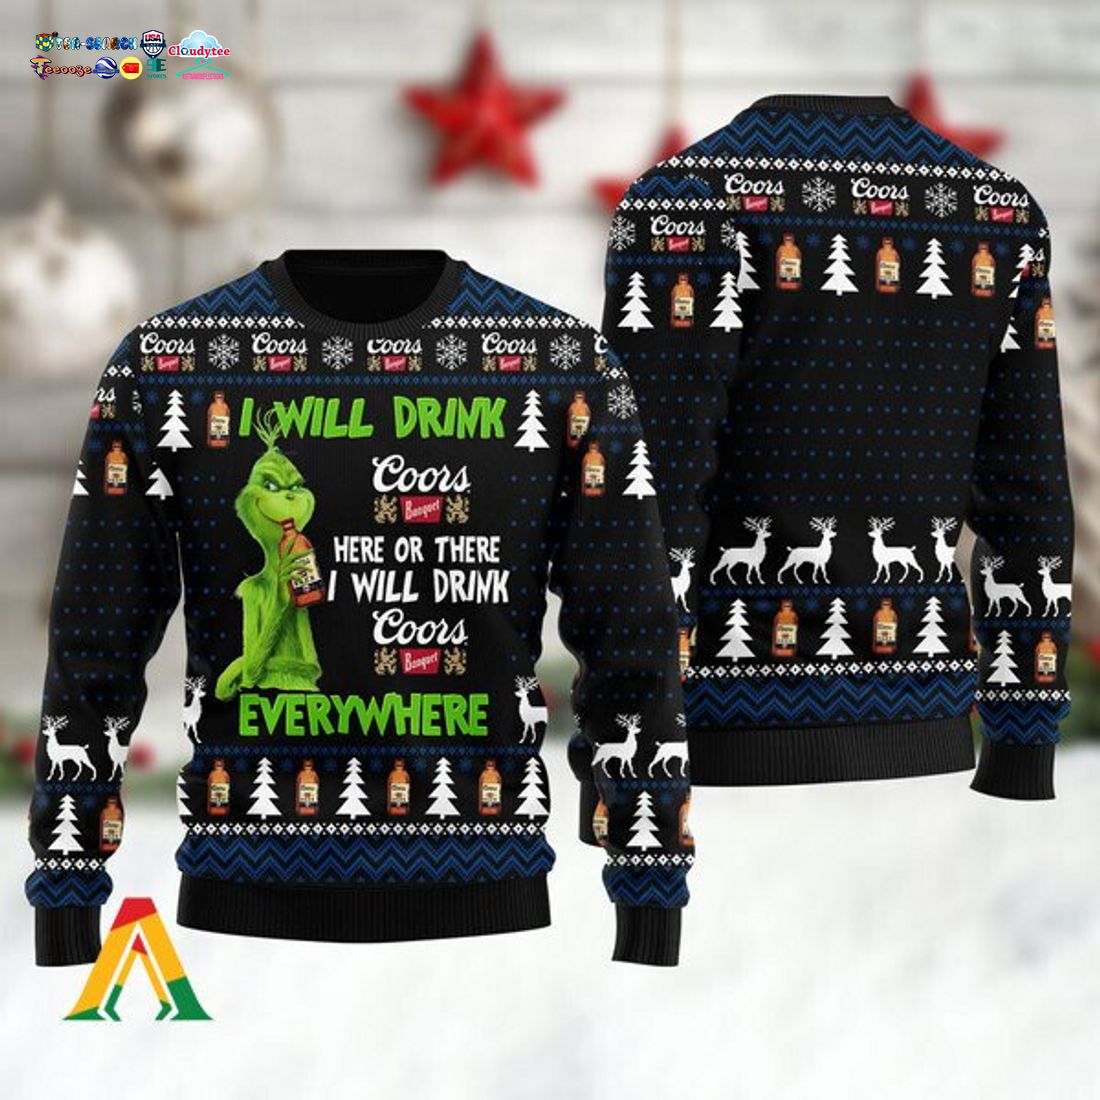 grinch-i-will-drink-coors-banquet-everywhere-ugly-christmas-sweater-1-Gwryv.jpg